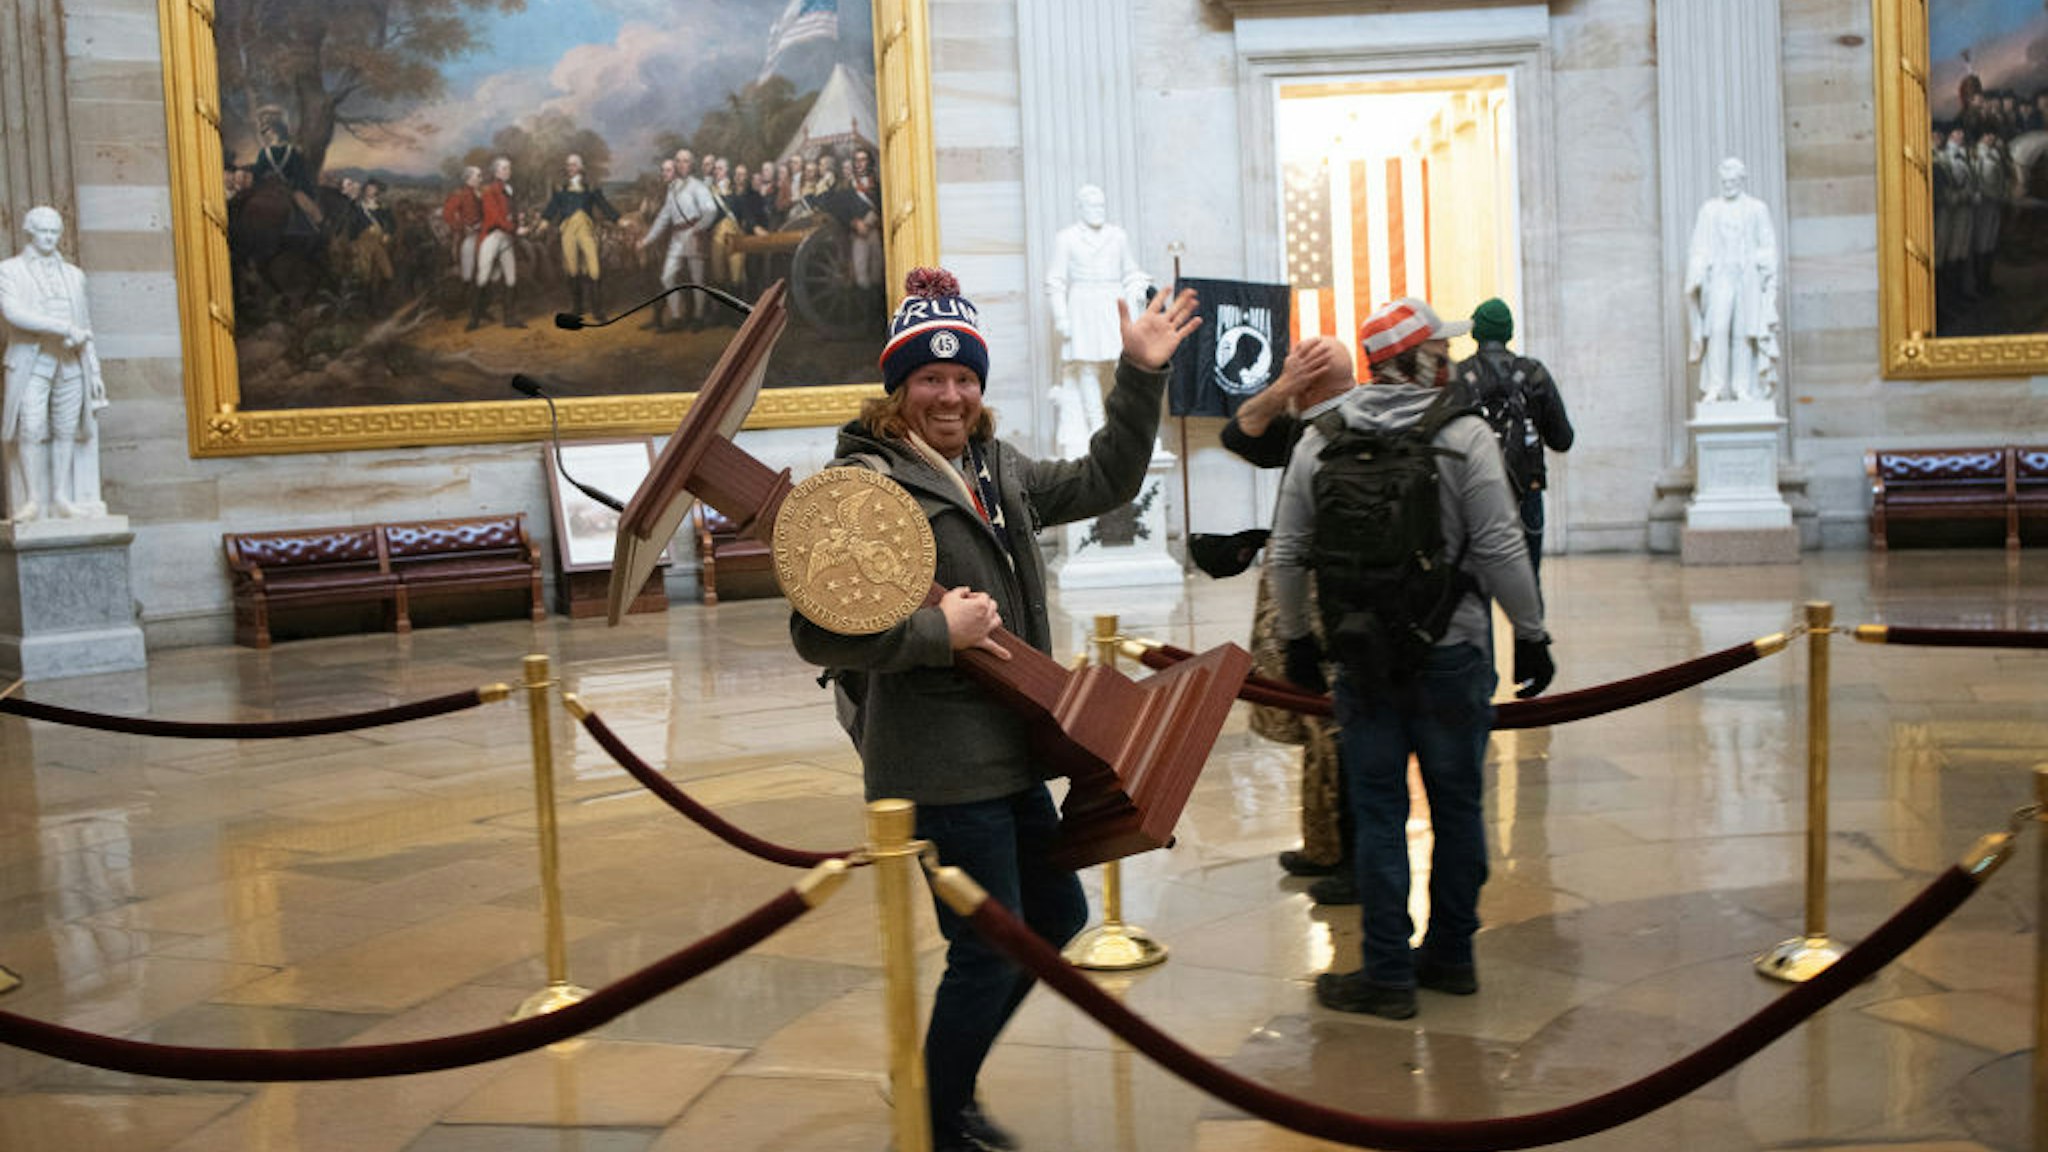 WASHINGTON, DC - JANUARY 06: A pro-Trump protester carries the lectern of U.S. Speaker of the House Nancy Pelosi through the Roturnda of the U.S. Capitol Building after a pro-Trump mob stormed the building on January 06, 2021 in Washington, DC. Congress held a joint session today to ratify President-elect Joe Biden's 306-232 Electoral College win over President Donald Trump. A group of Republican senators said they would reject the Electoral College votes of several states unless Congress appointed a commission to audit the election results.